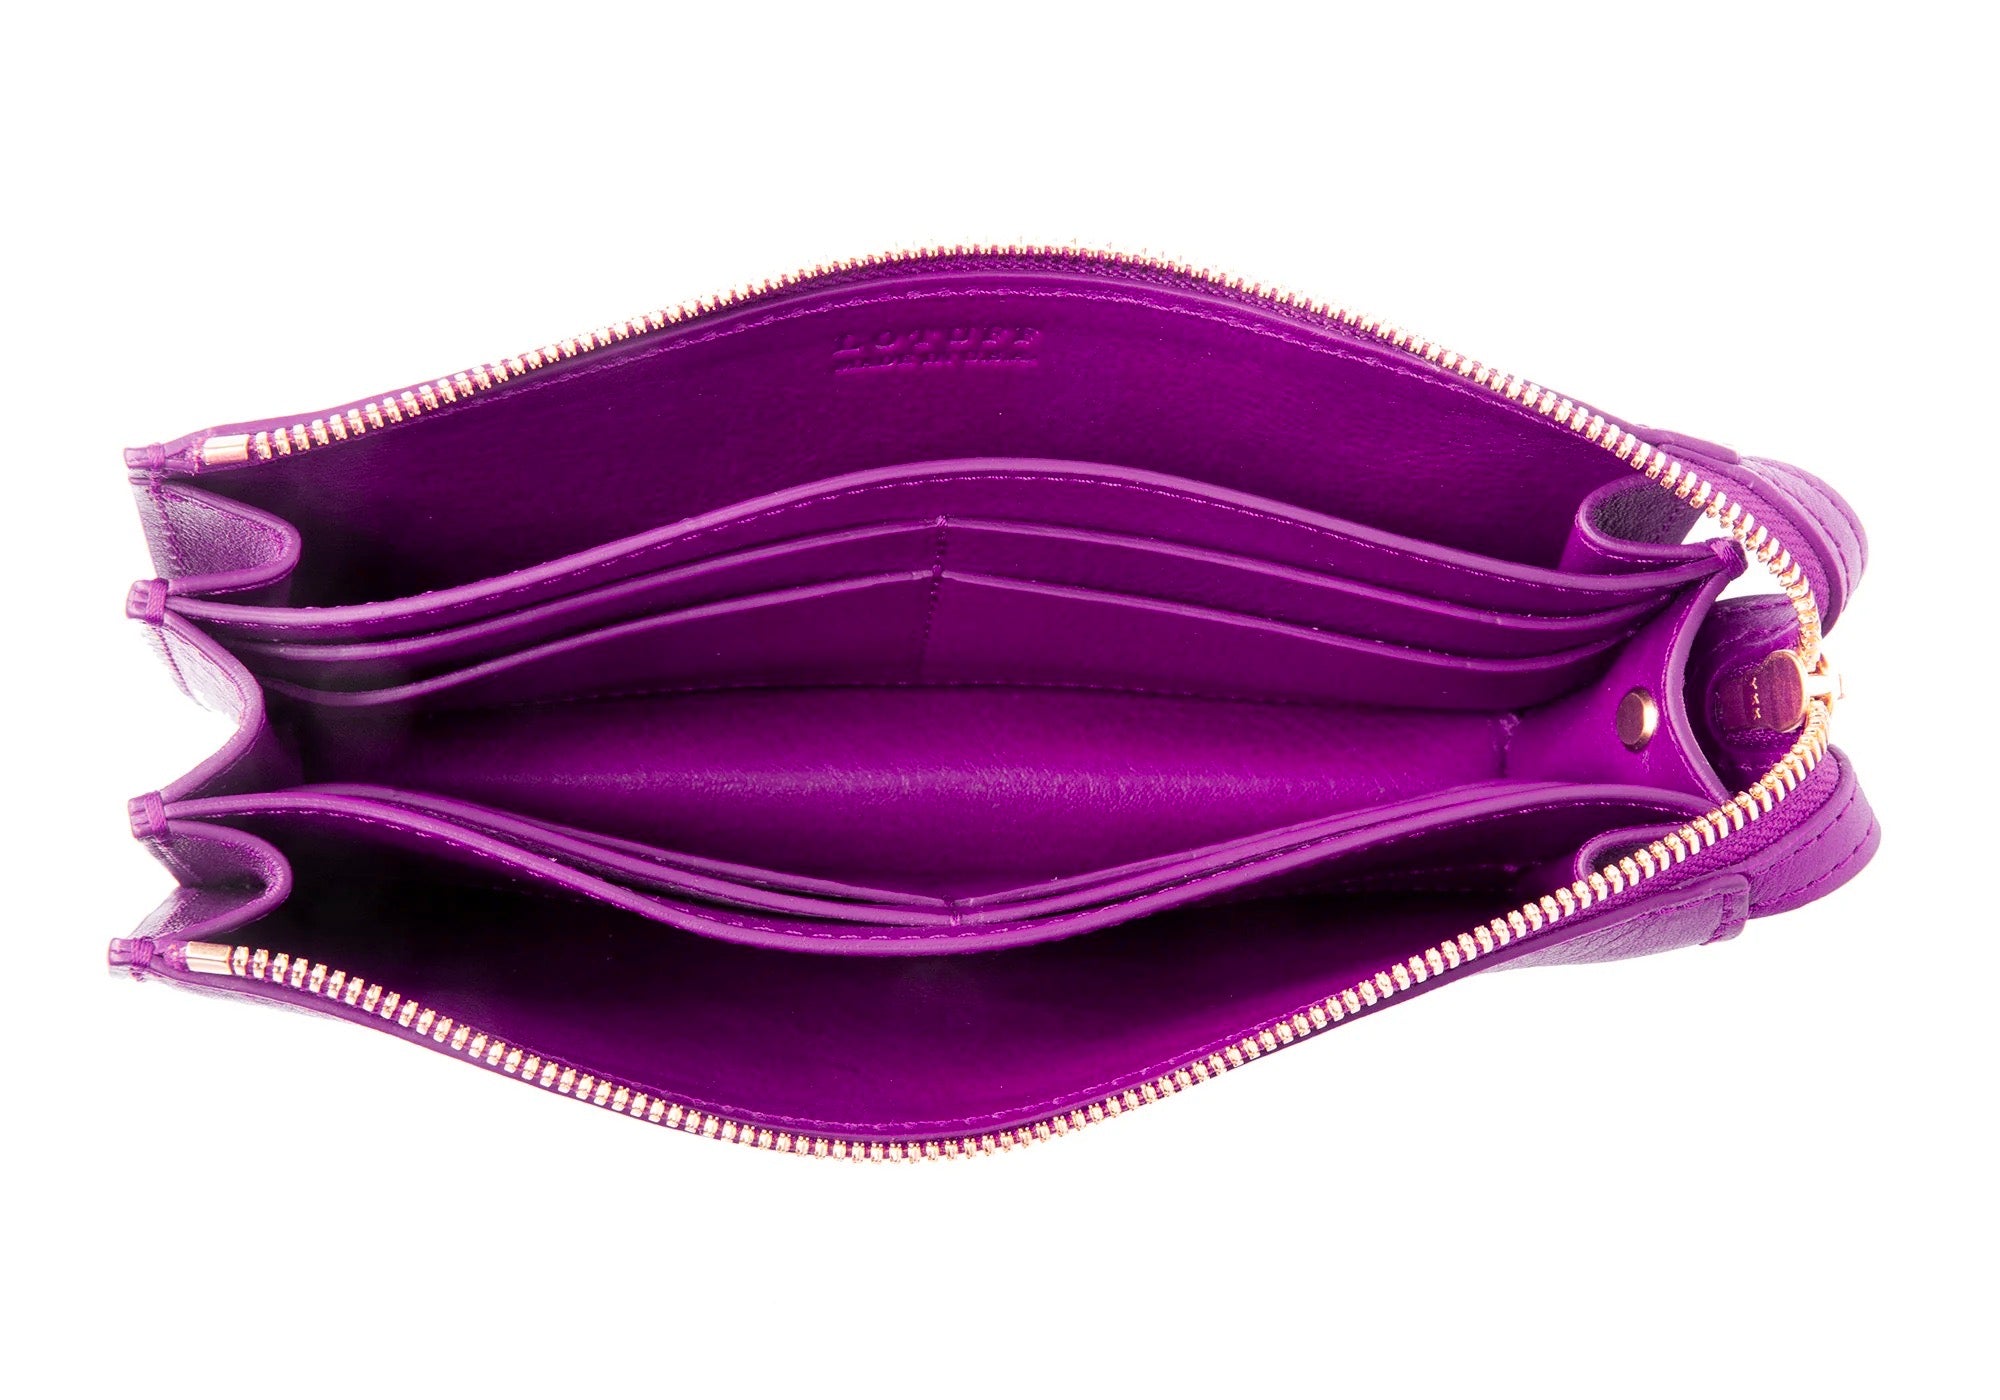 Interior View of Tripp Wallet Orchid